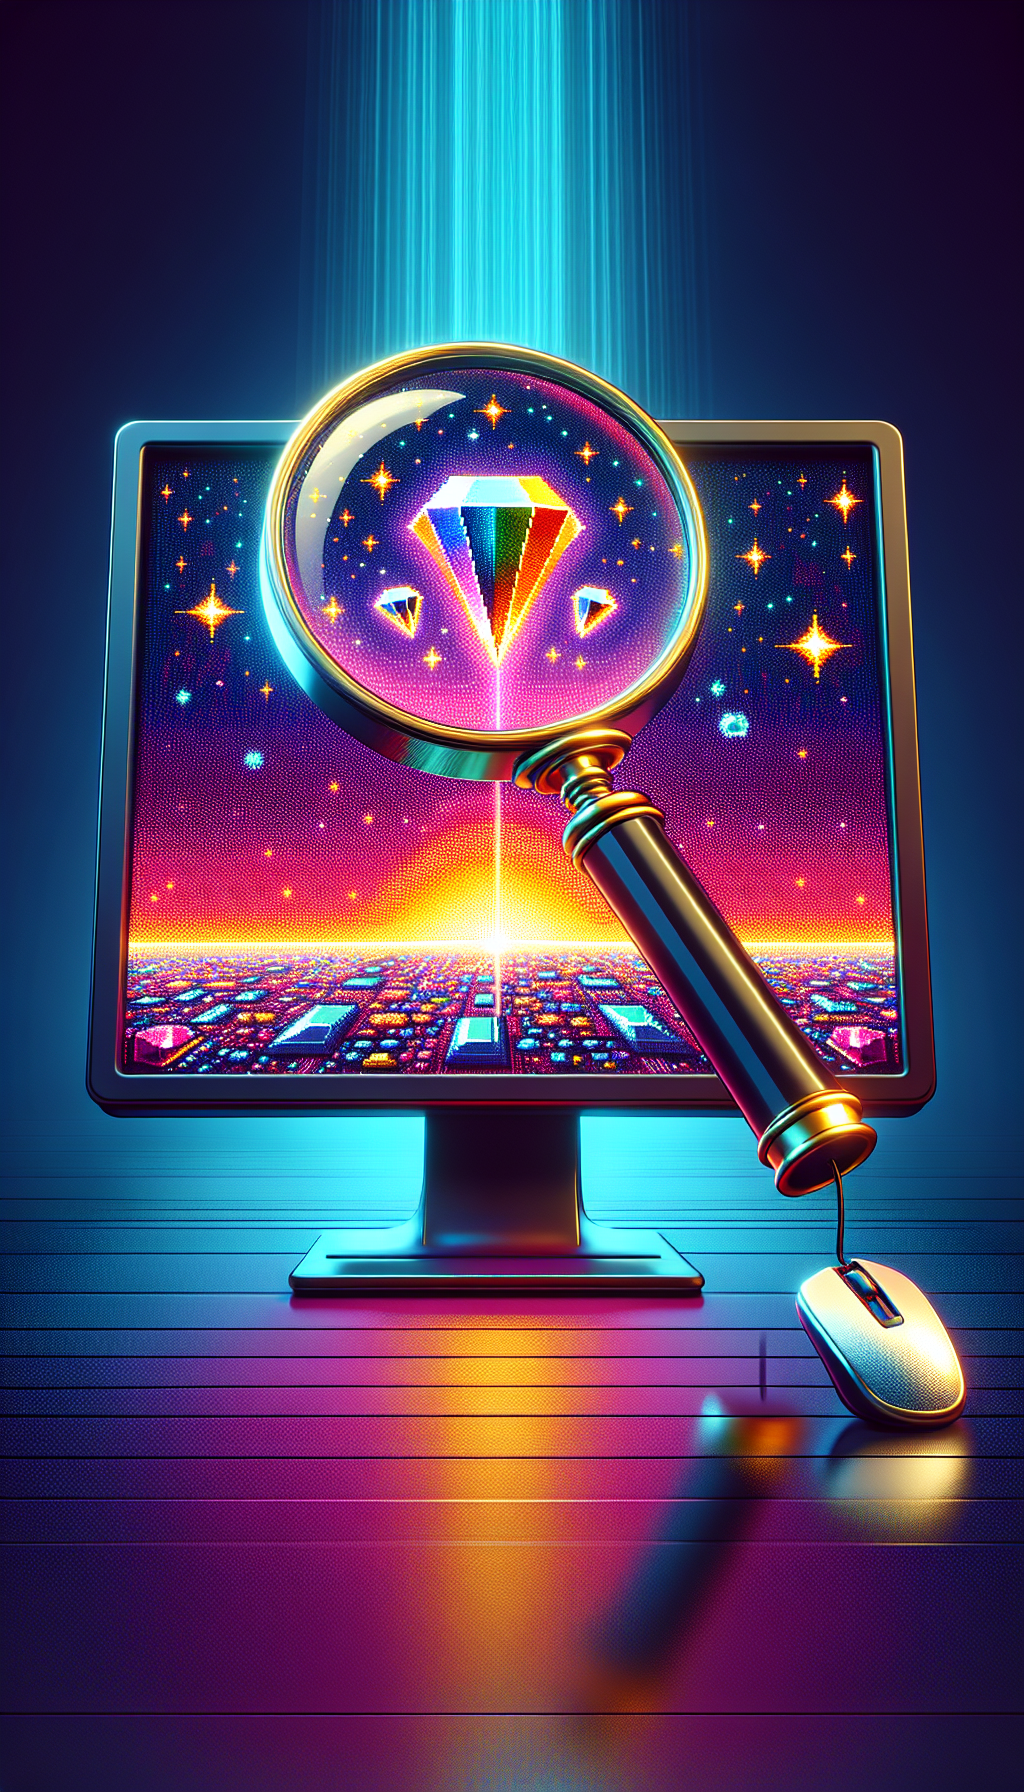 An illustration depicts a magnifying glass hovering over a vibrant, pixelated canvas on a screen, revealing otherwise unseen precious stones and glittery elements within the artwork, symbolizing the discovery of hidden value. At the magnifying glass's handle, clicks a cursor icon with the text "Free Appraisal" glowing like a neon sign. The image blends pixel art with realistic shading for depth.